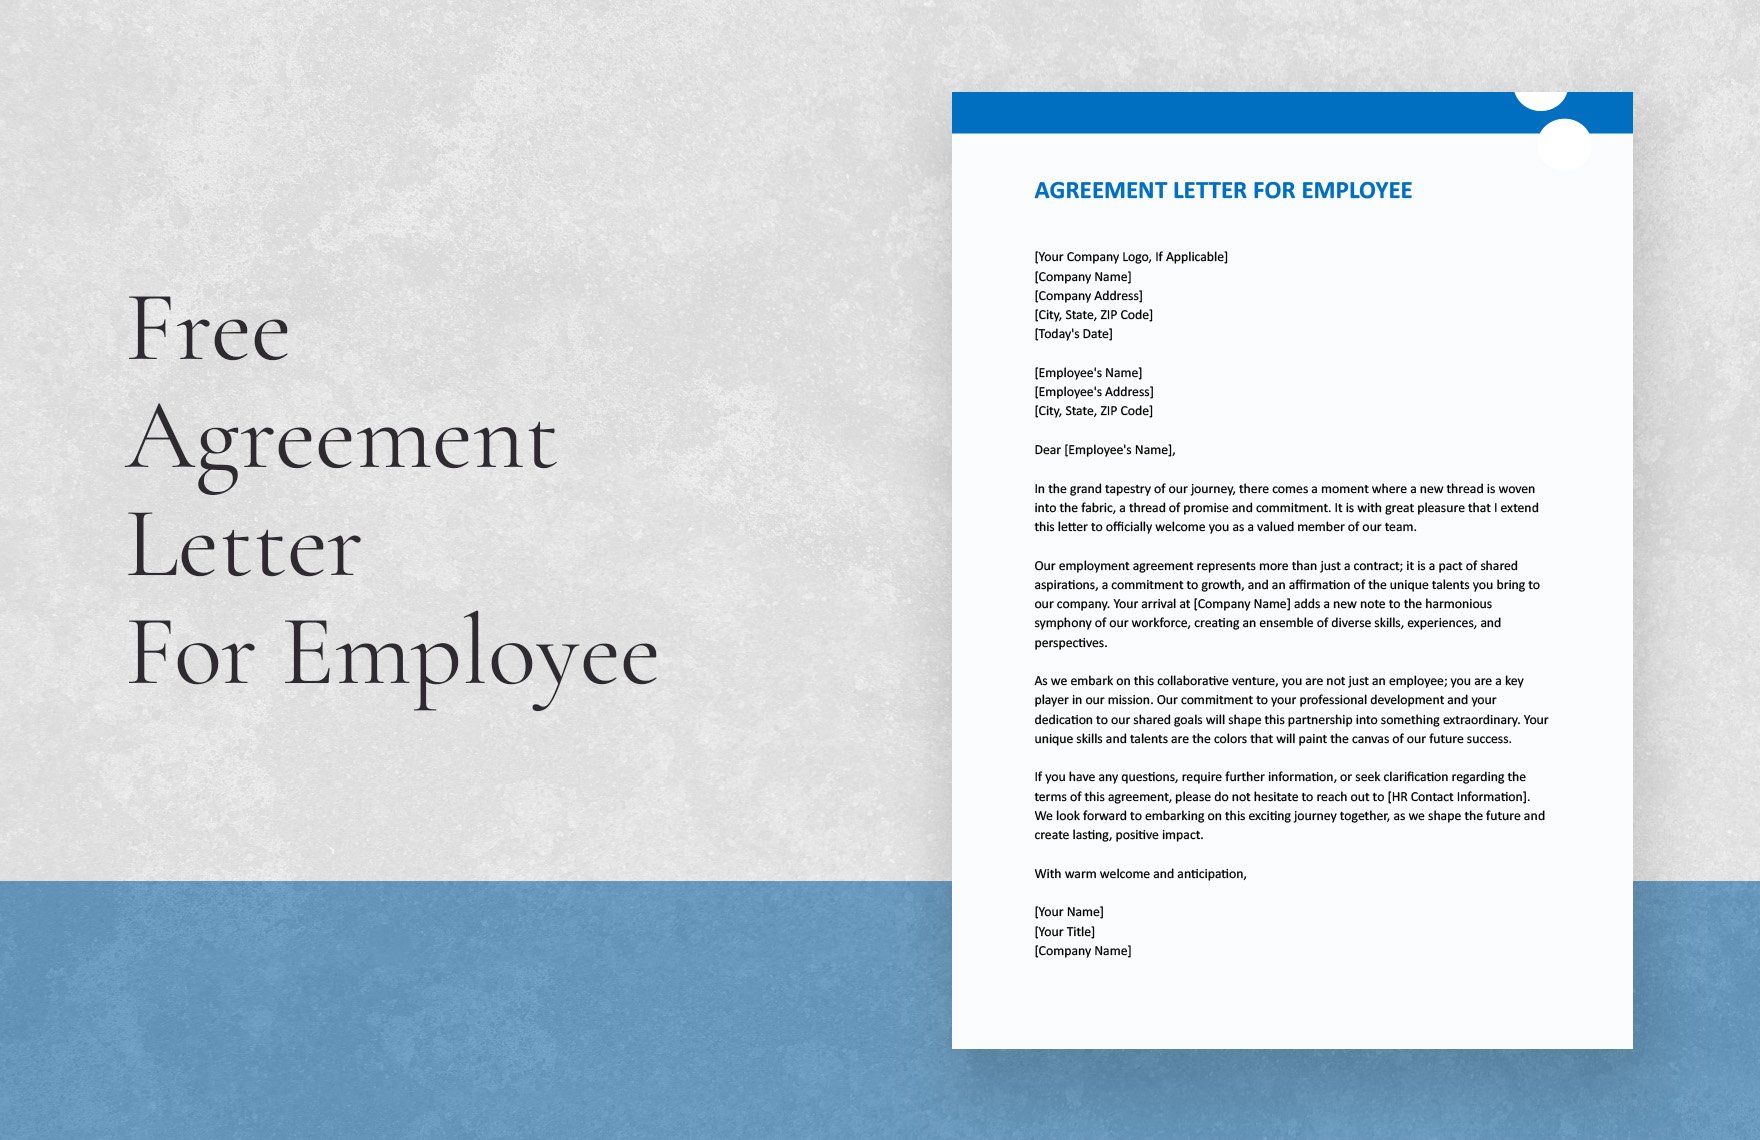 Agreement Letter For Employee in Word, Google Docs